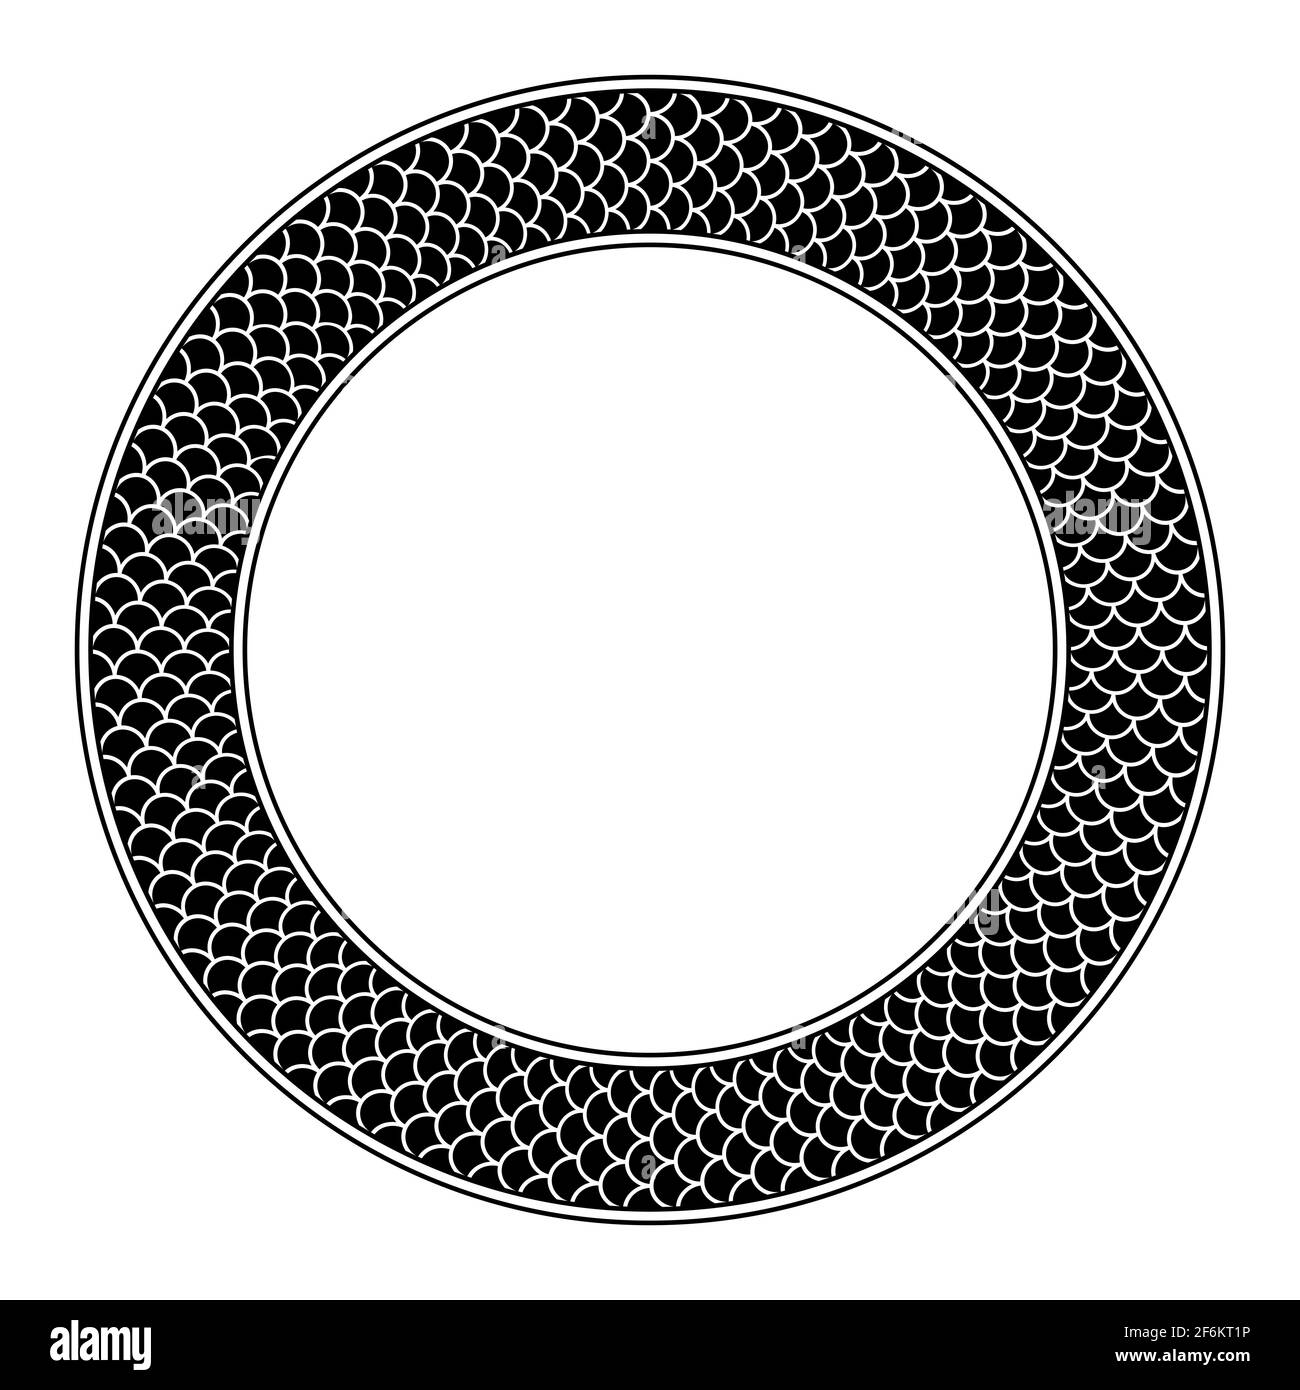 Circle frame with fish scale pattern. Round decorative border, with three rows of overlapping black and cycloid fish scales, framed with lines. Stock Photo